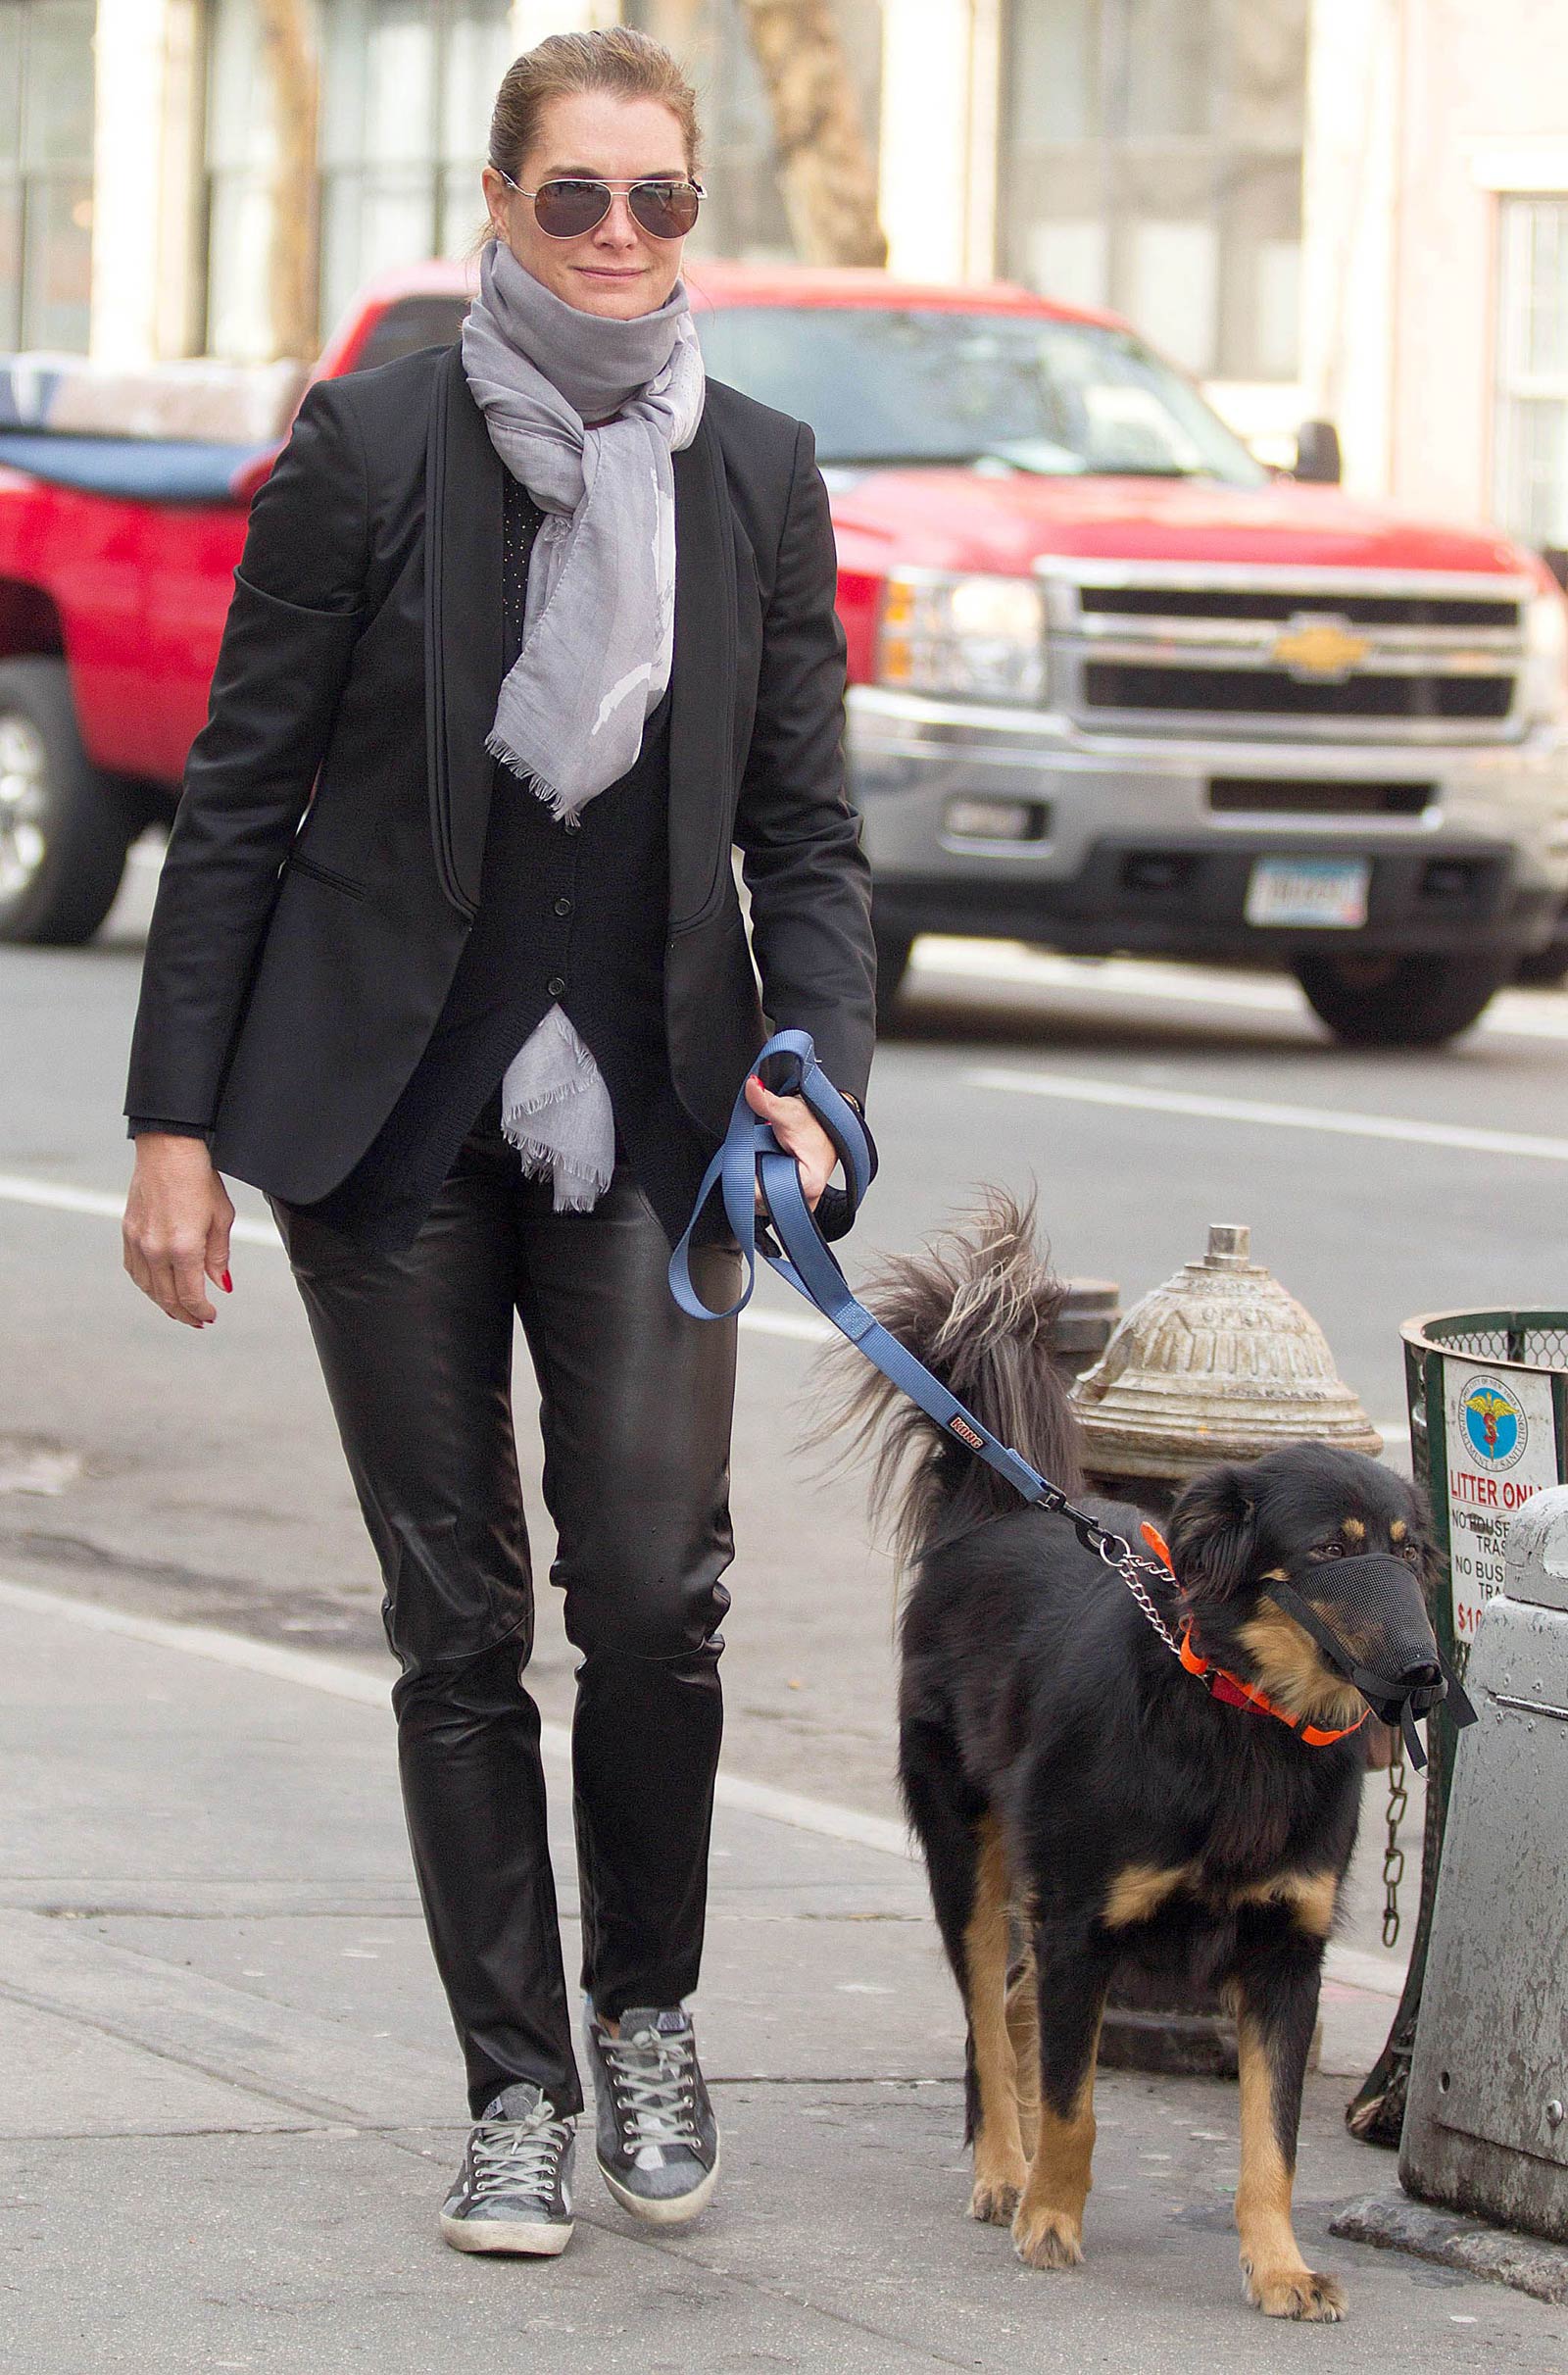 Brooke Shields taking a stroll with her pet dog